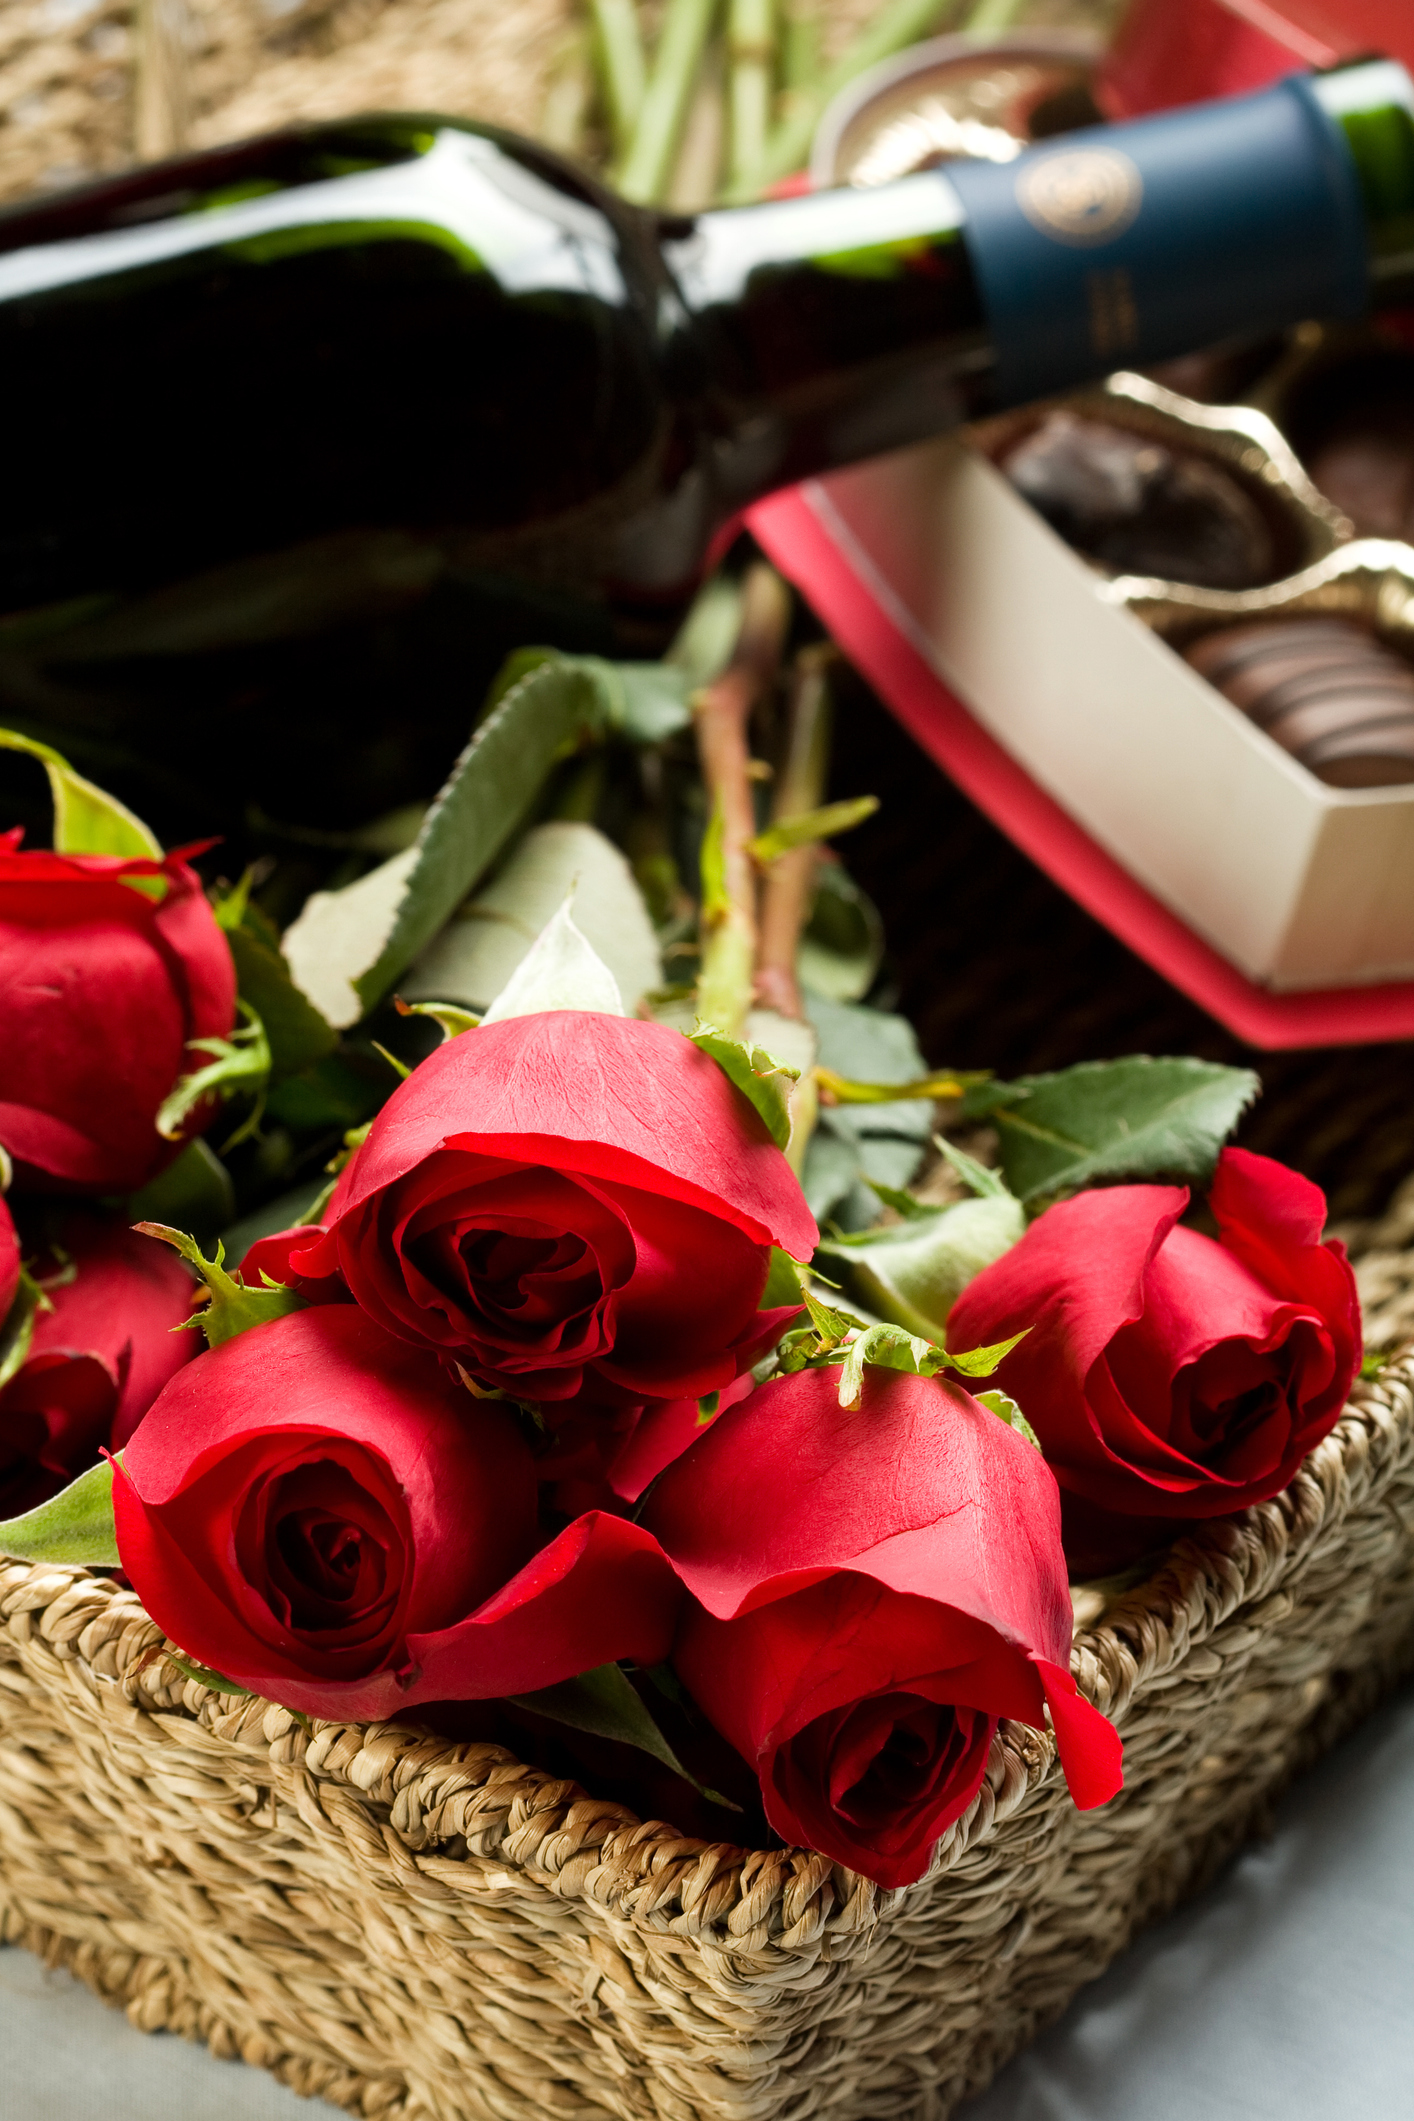 Roses, Wine and Chocolates in a large wicker tray